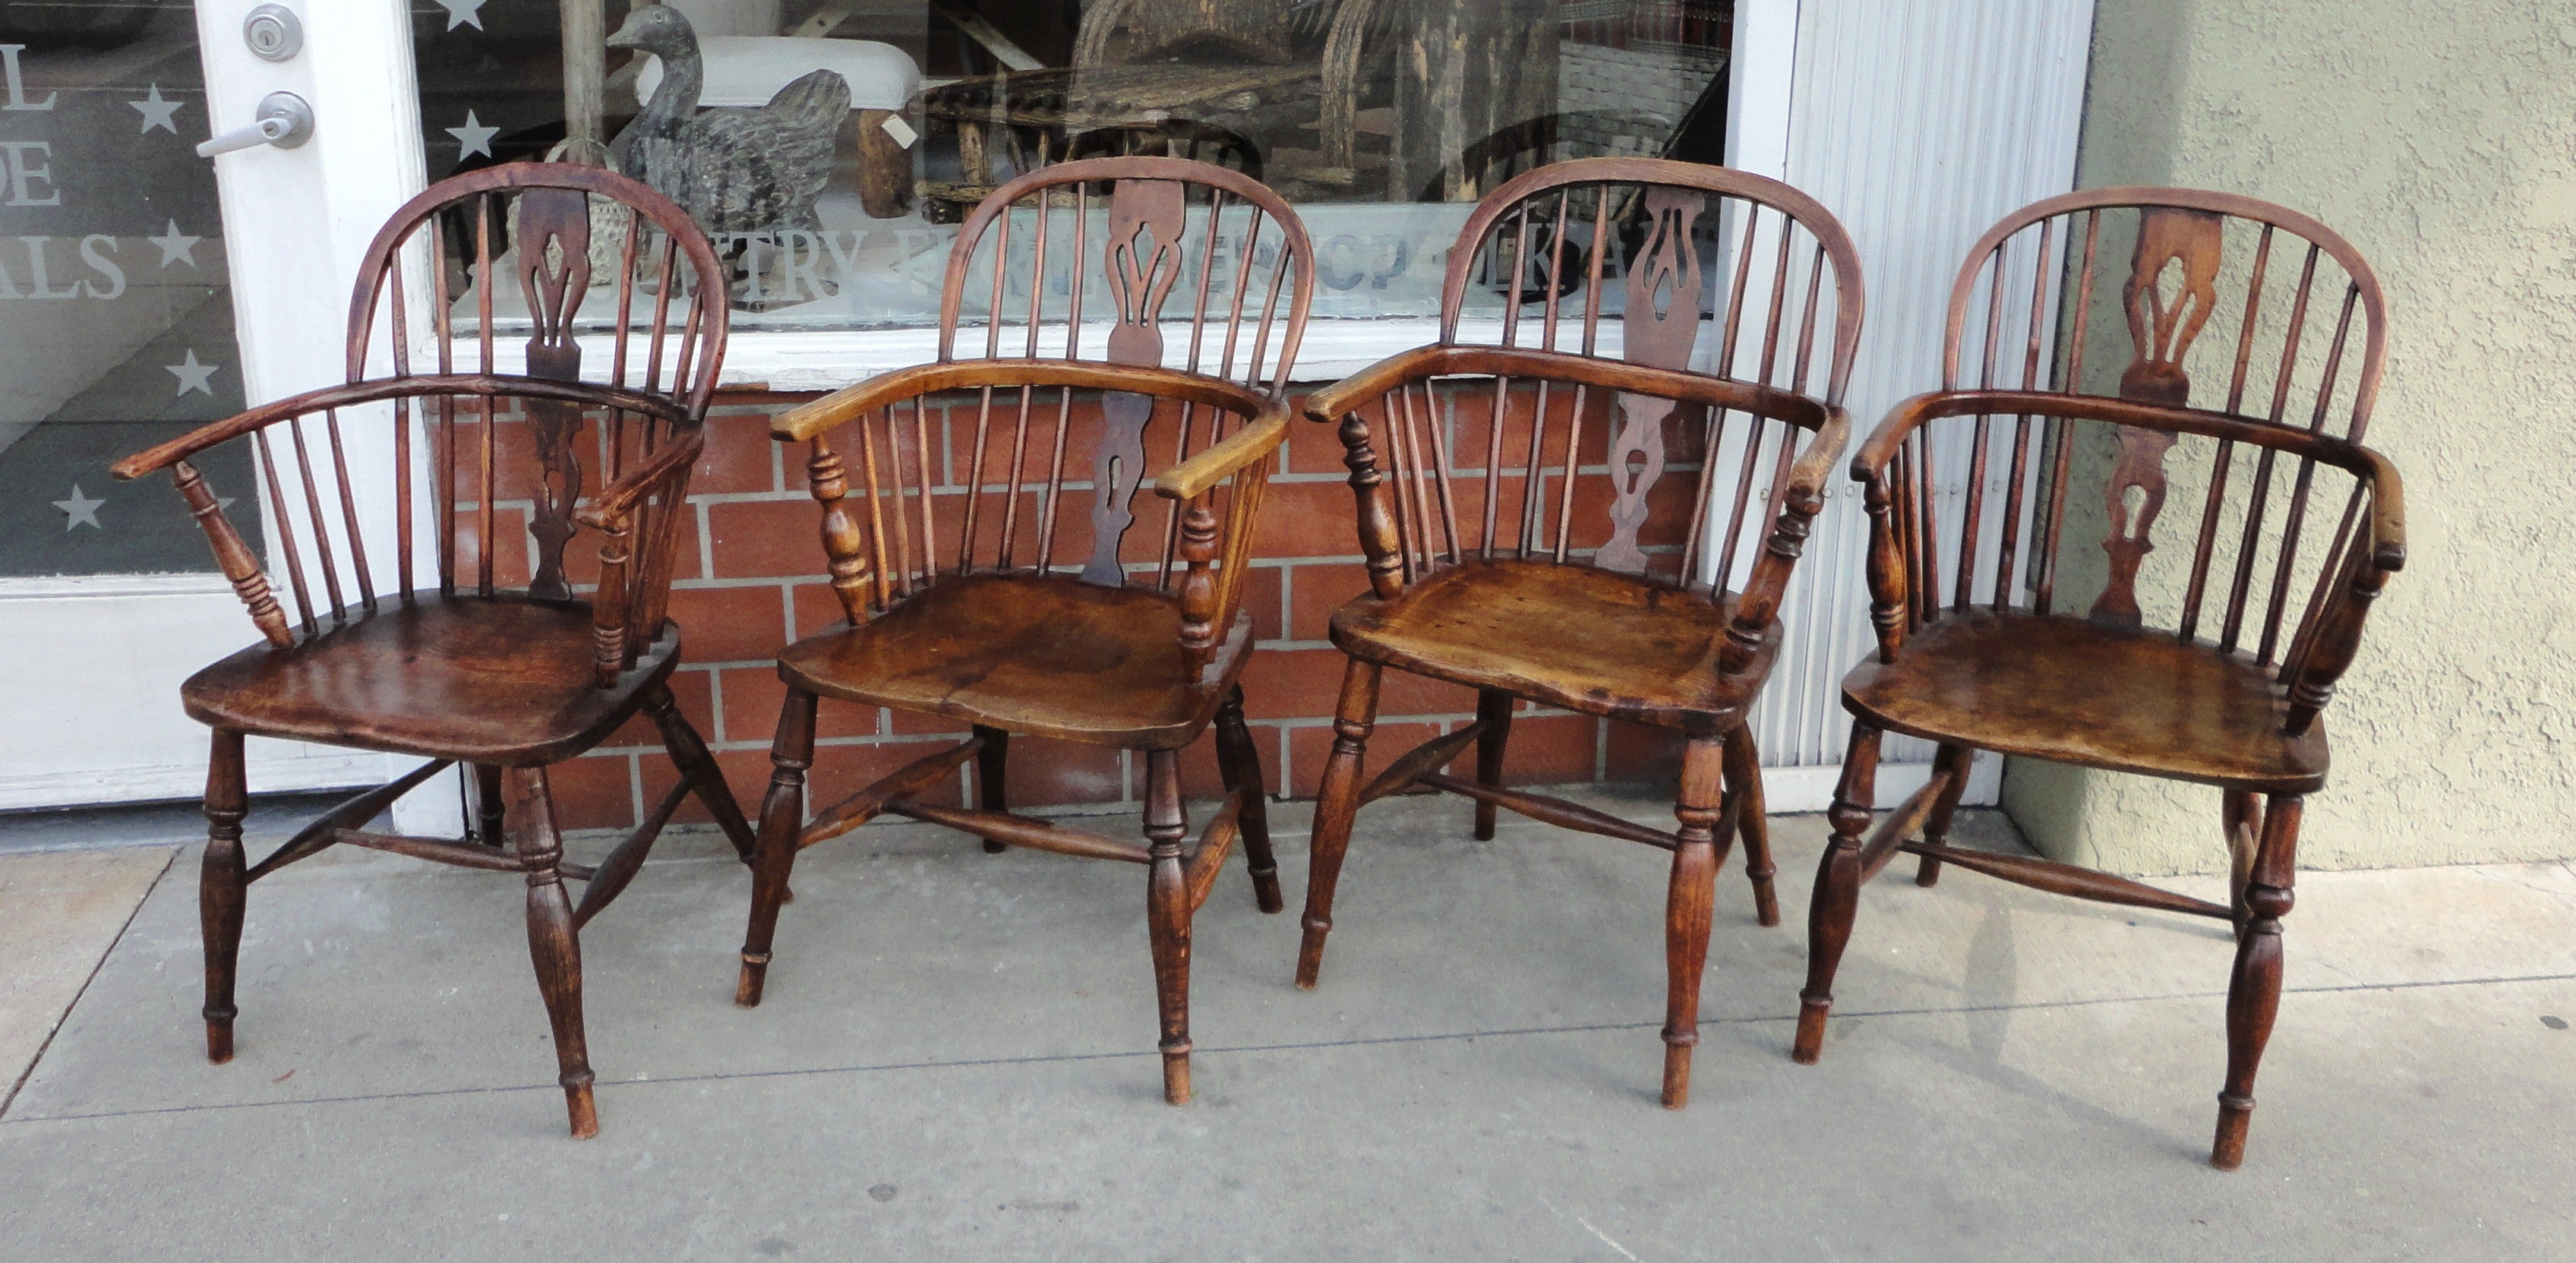 Set of Four Early 19thc English Windsor Chairs